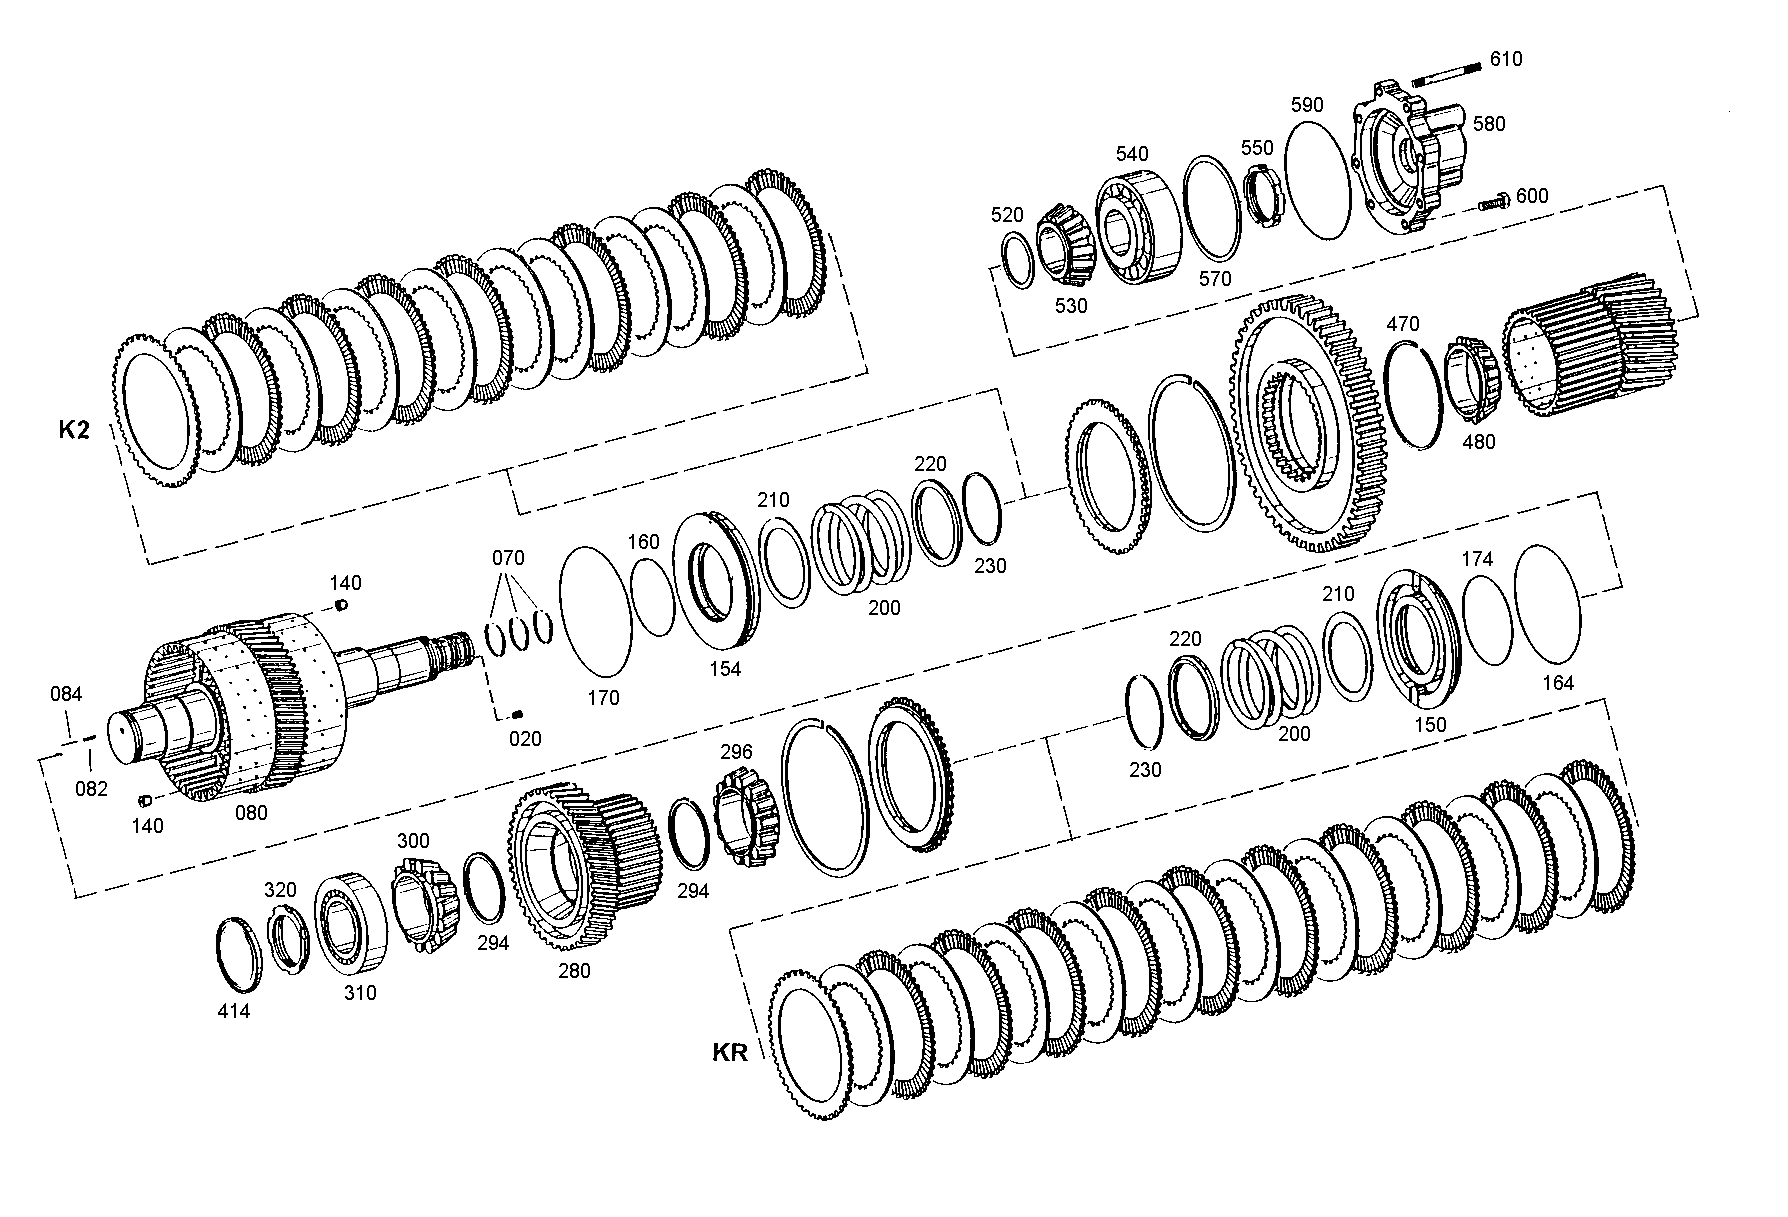 drawing for BUSINESS SOLUTIONS / DIV.GESCO 100234A1 - WASHER (figure 1)